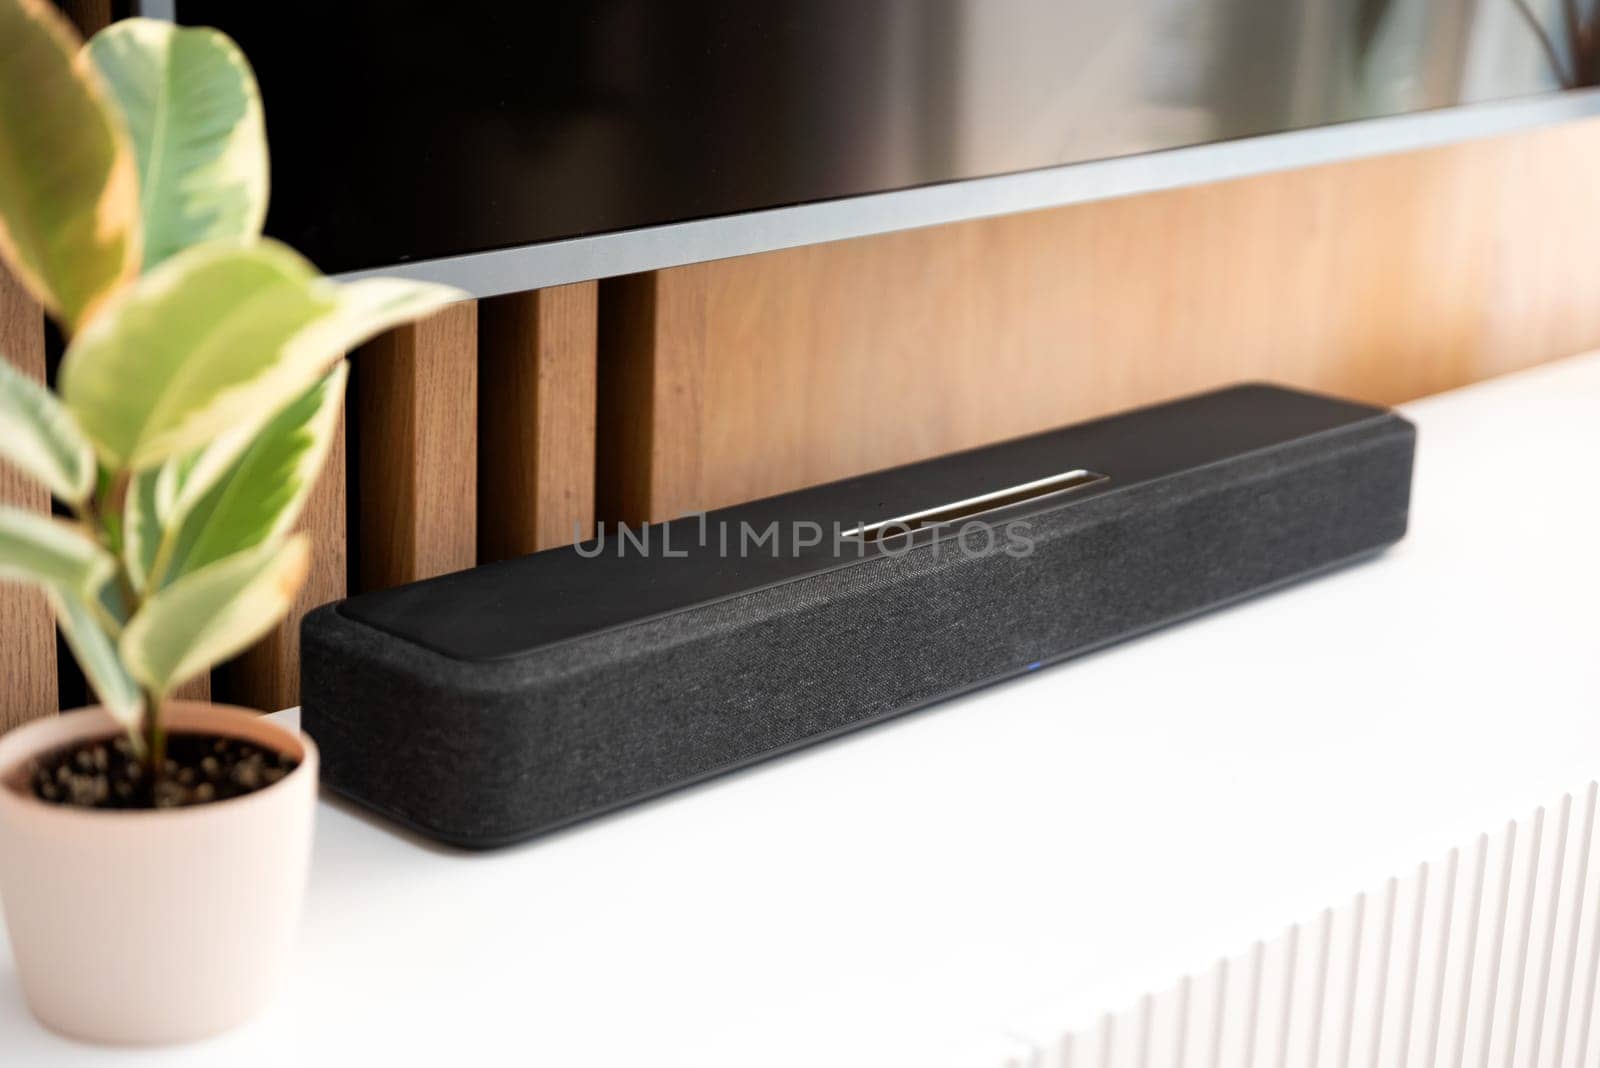 Soundbar in a modern home. Listening to music by simpson33